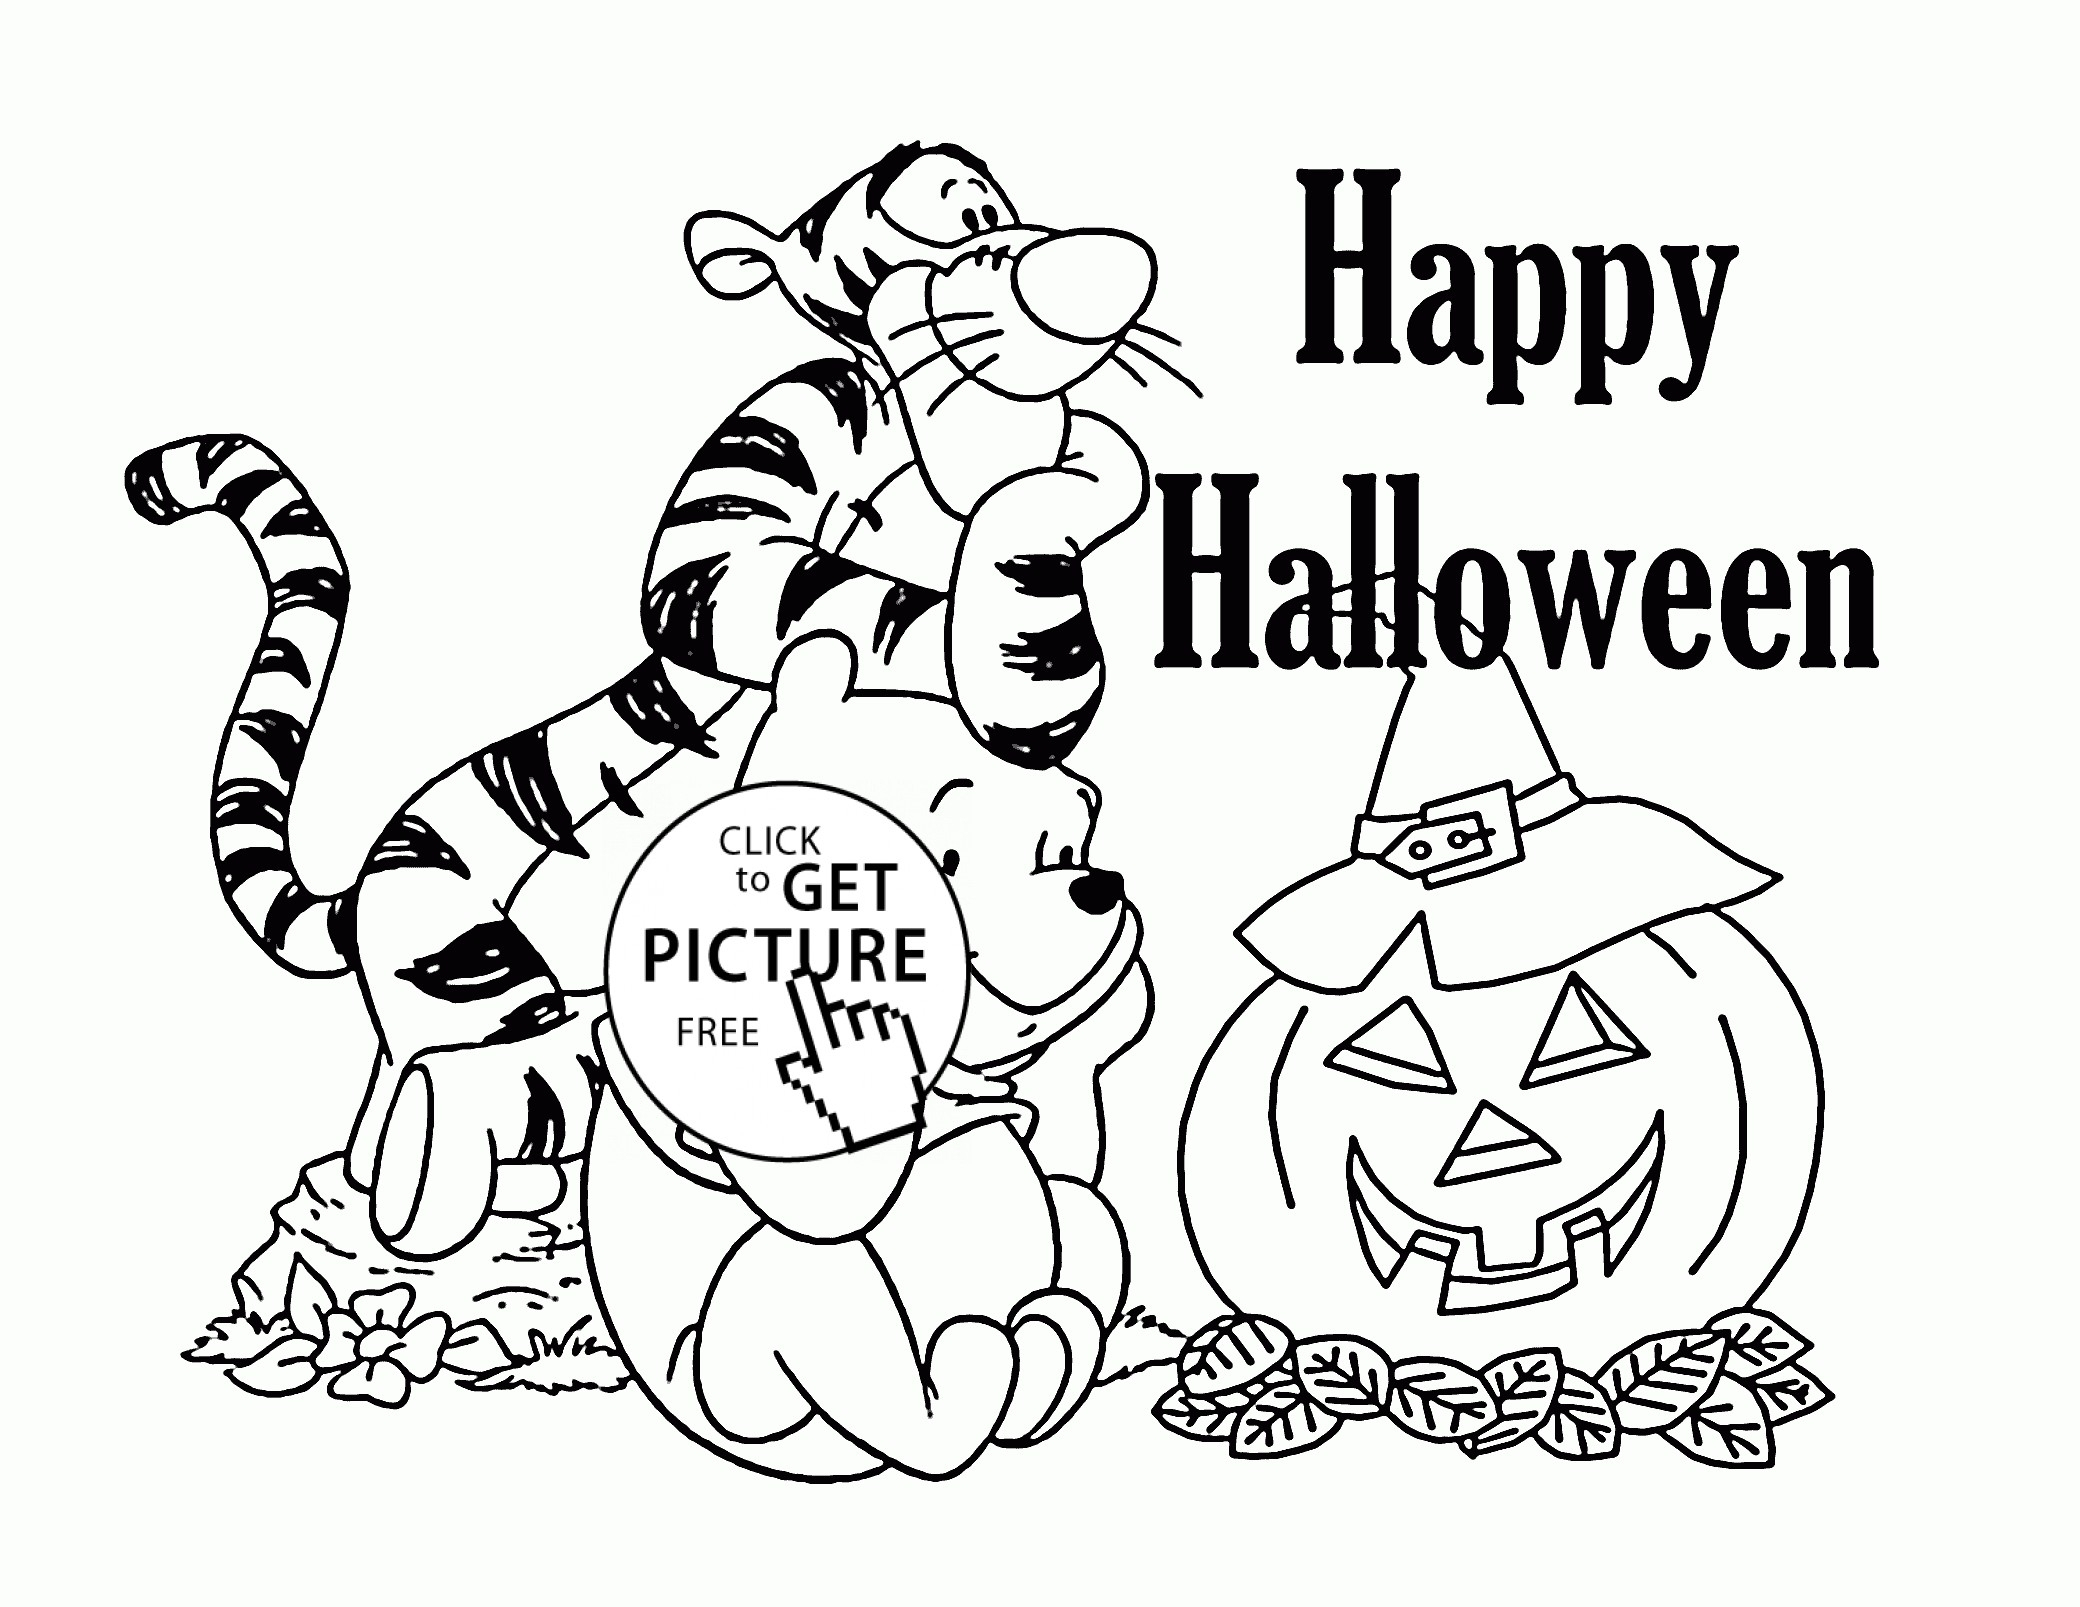 Halloween Coloring Pages For Kids At GetColorings Free Printable Colorings Pages To Print